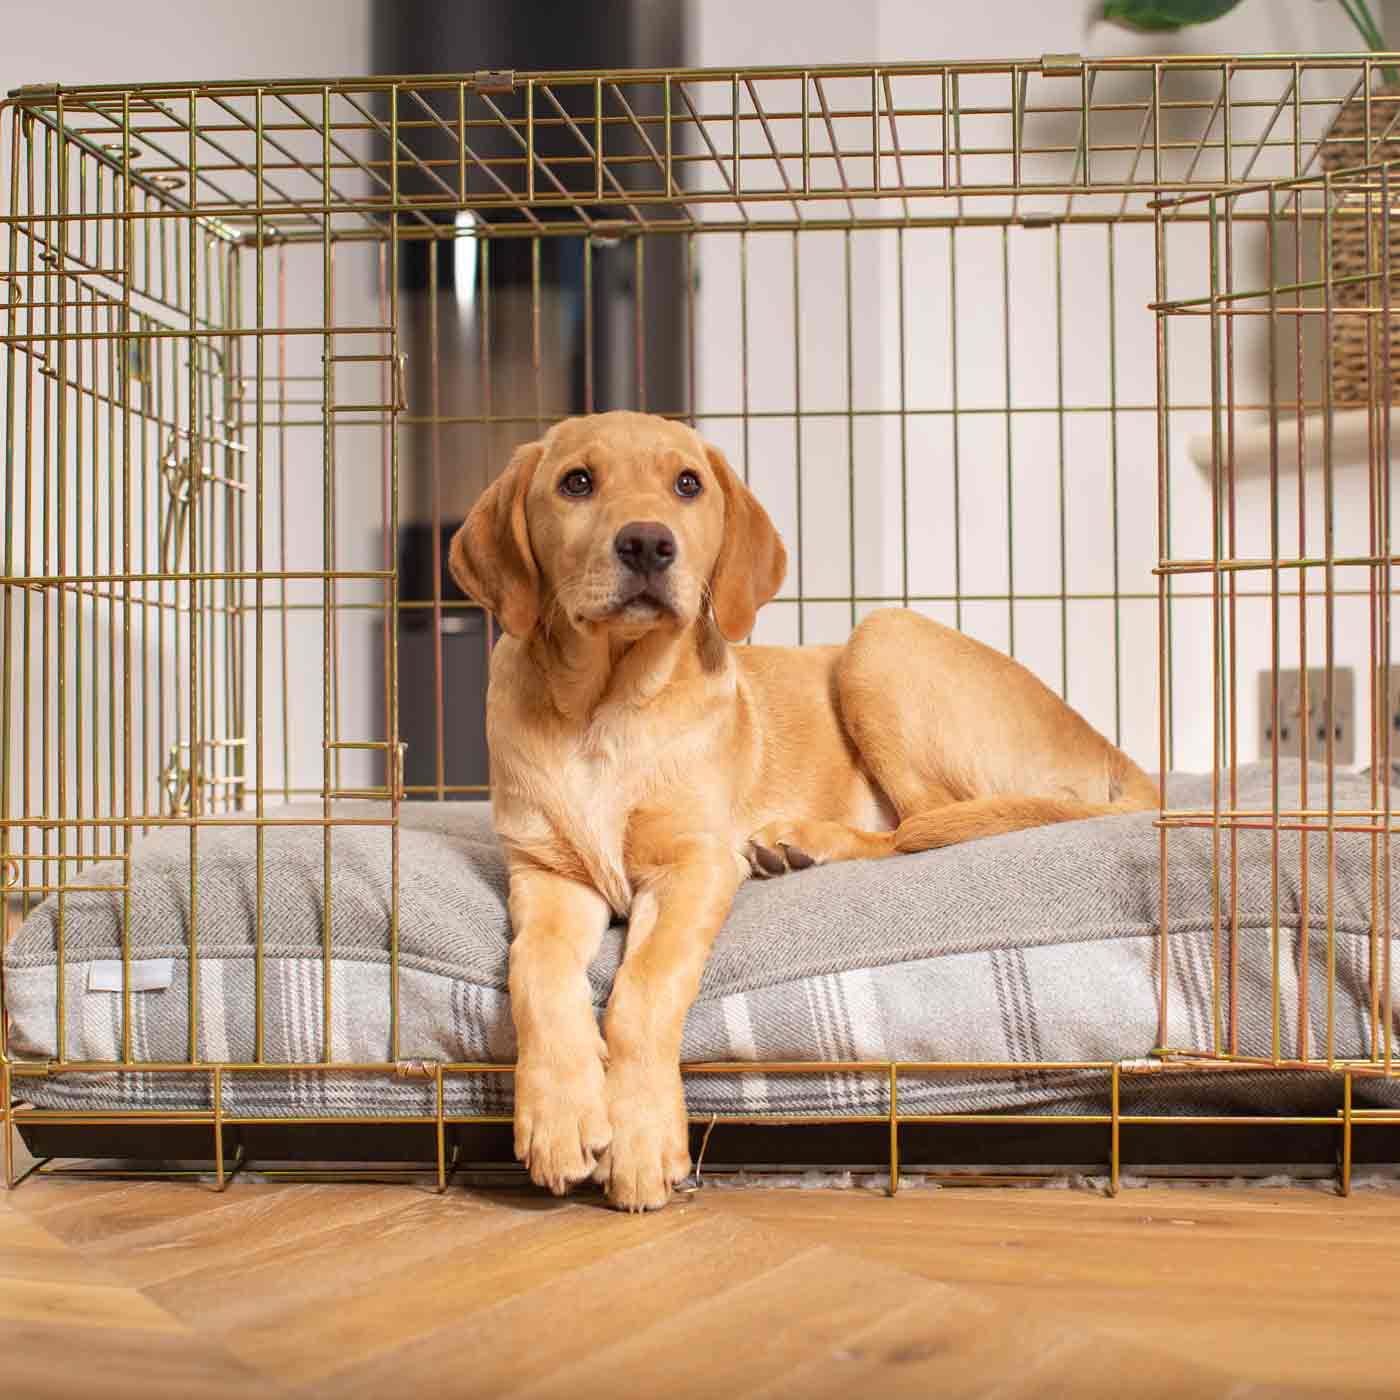 Luxury Dog Crate Cushion, Dove Grey Tweed Crate Cushion! Perfect Dog Crate Accessory, Available To Personalise Now at Lords & Labradors